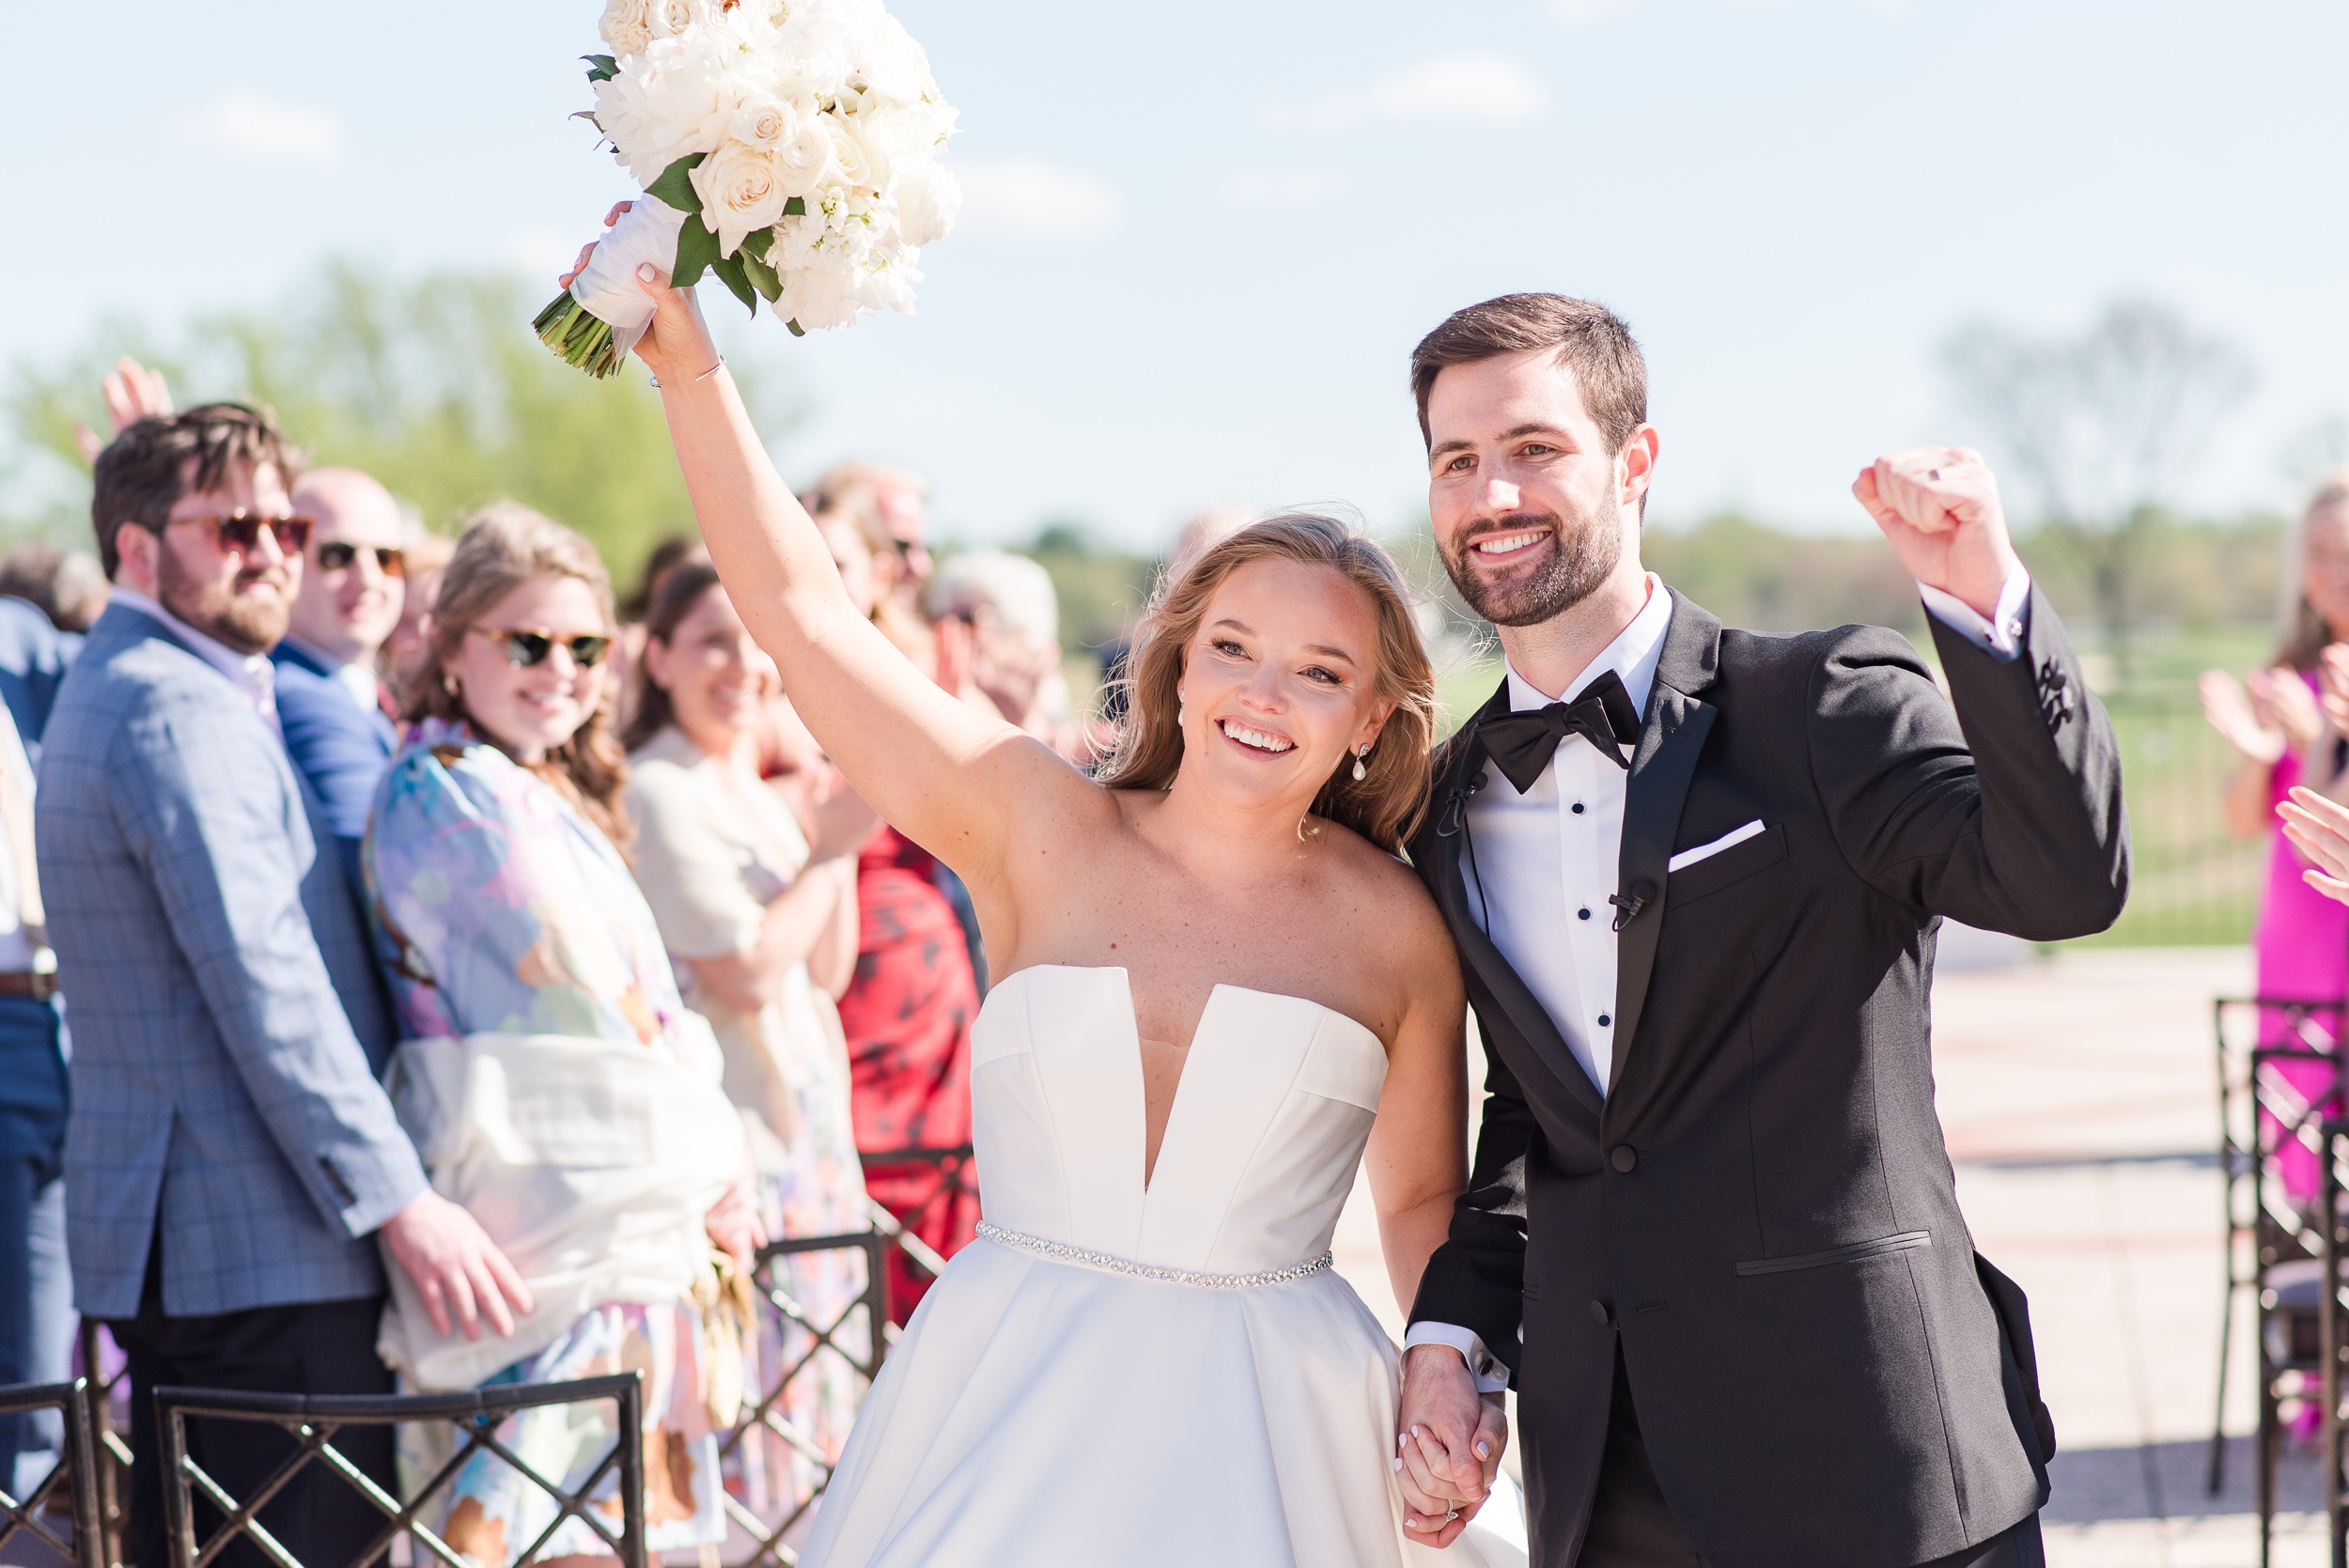 Newlyweds put their hands in the air while exiting their wedding ceremony